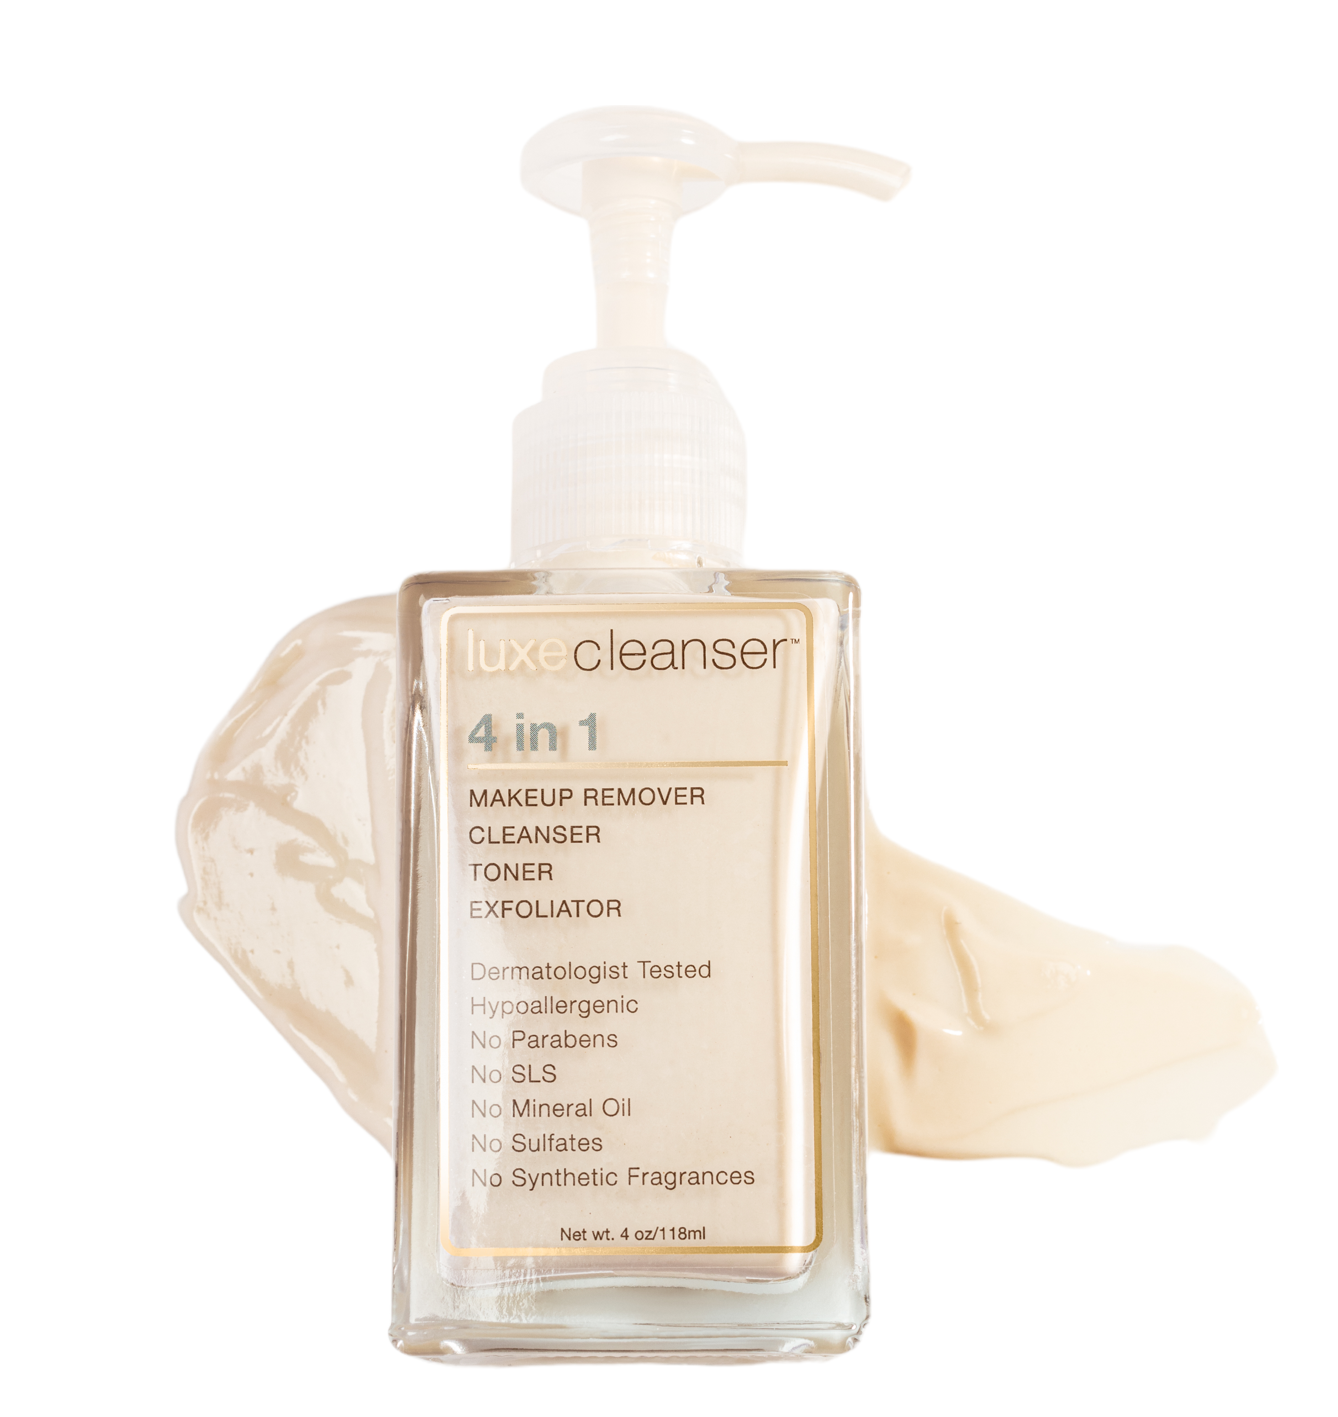 Lovely Luxuries: Chanel Mousse Exfoliante Purete Cleanser - Makeup